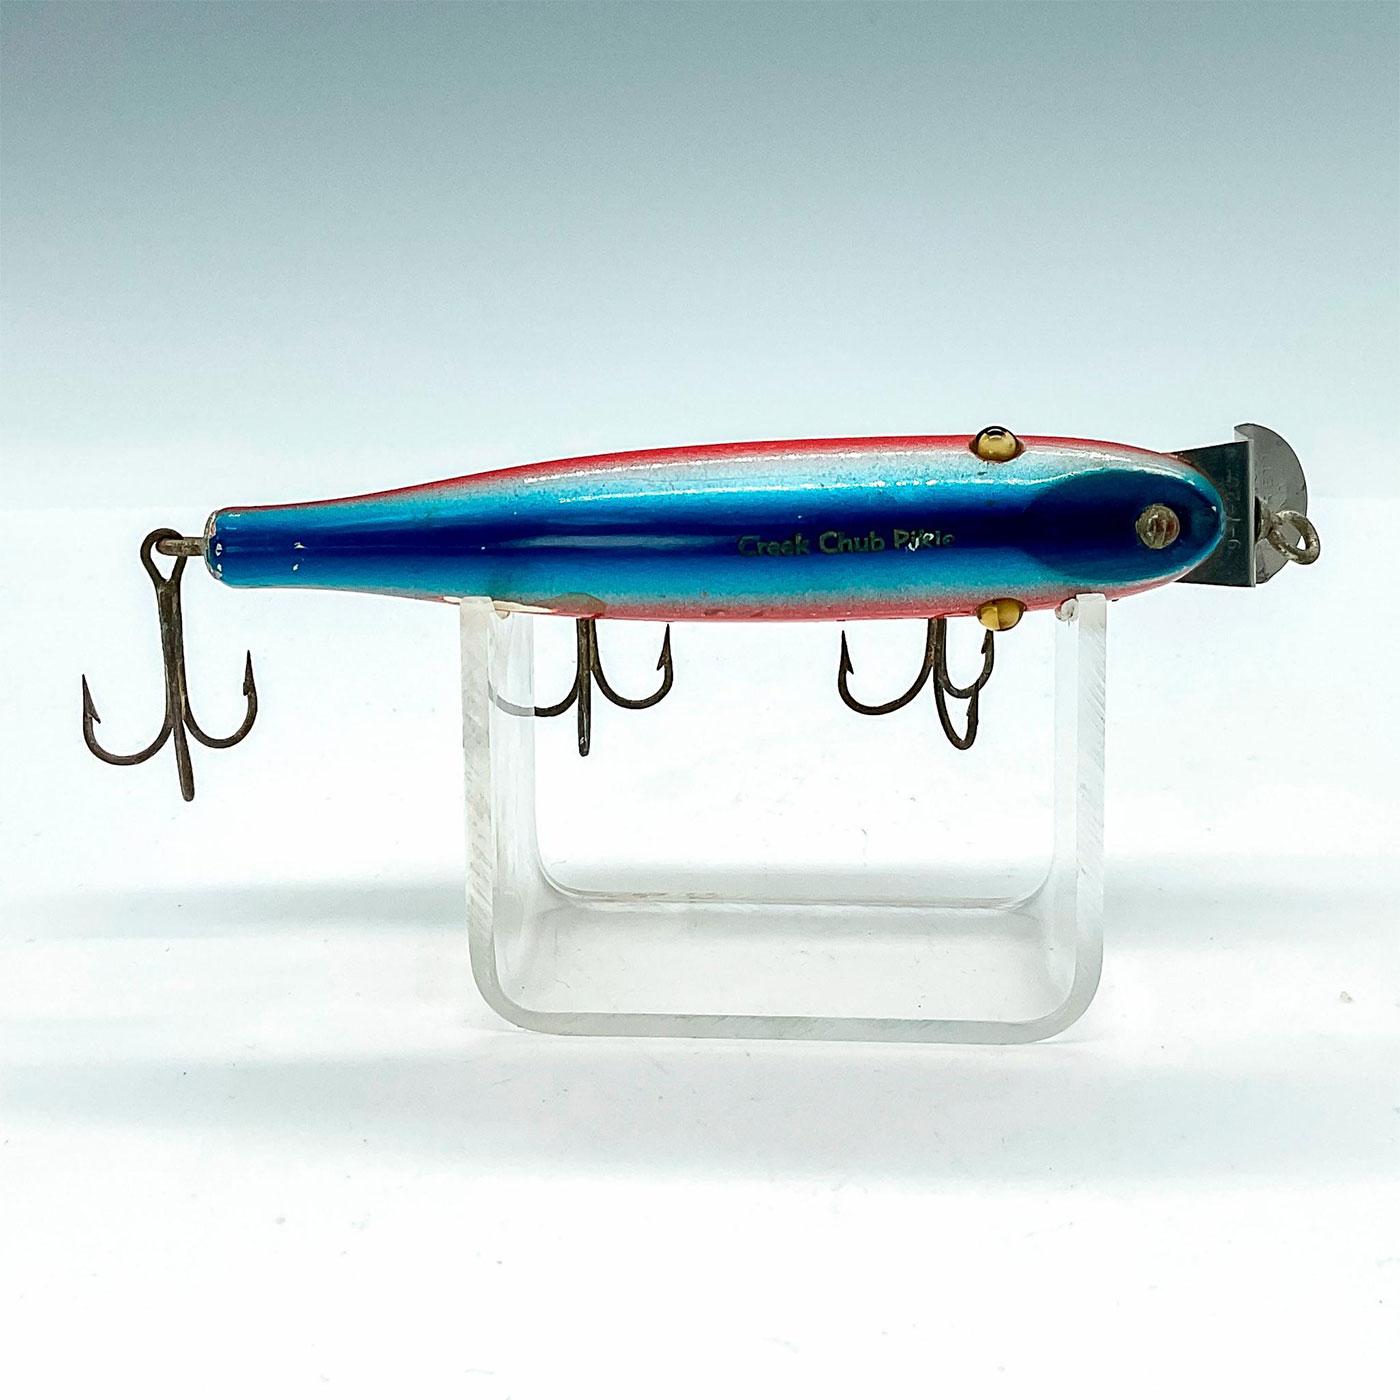 Sold at Auction: Vintage Creek Chub Lure No. 700 Pikie Color 732